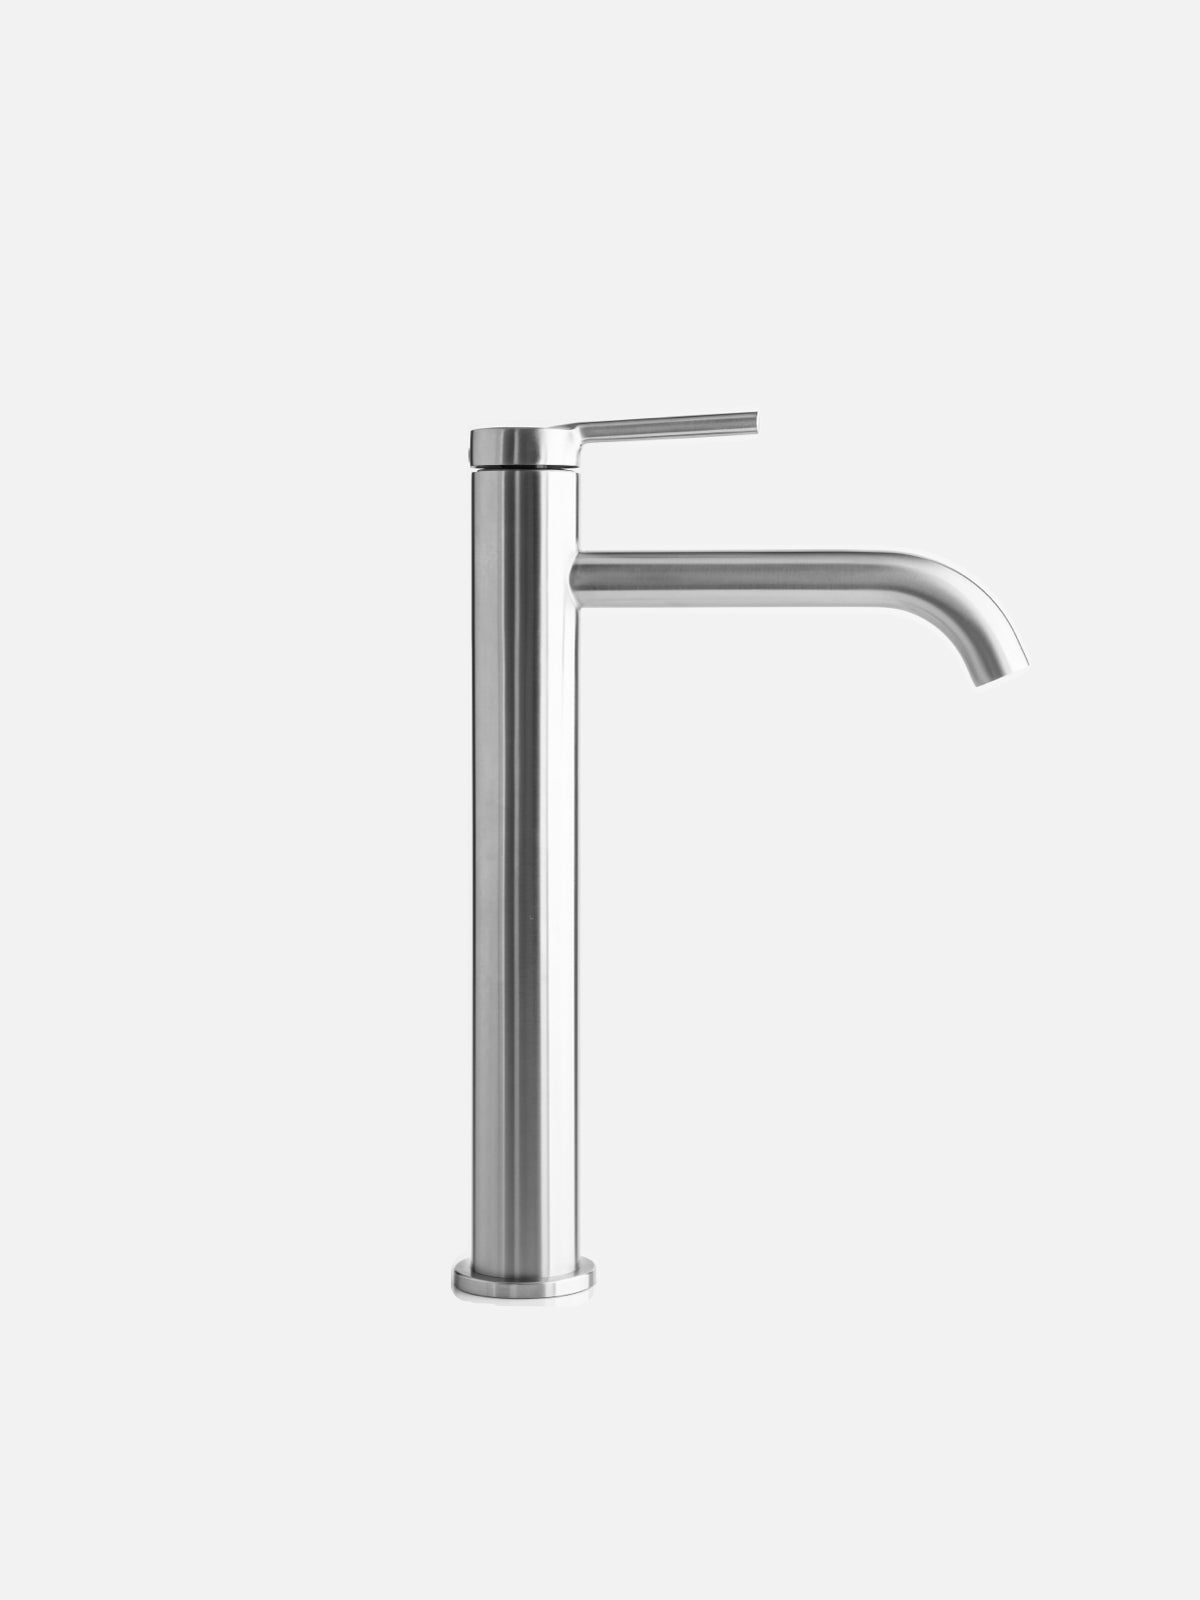 Basin Faucet Elevated-BT051